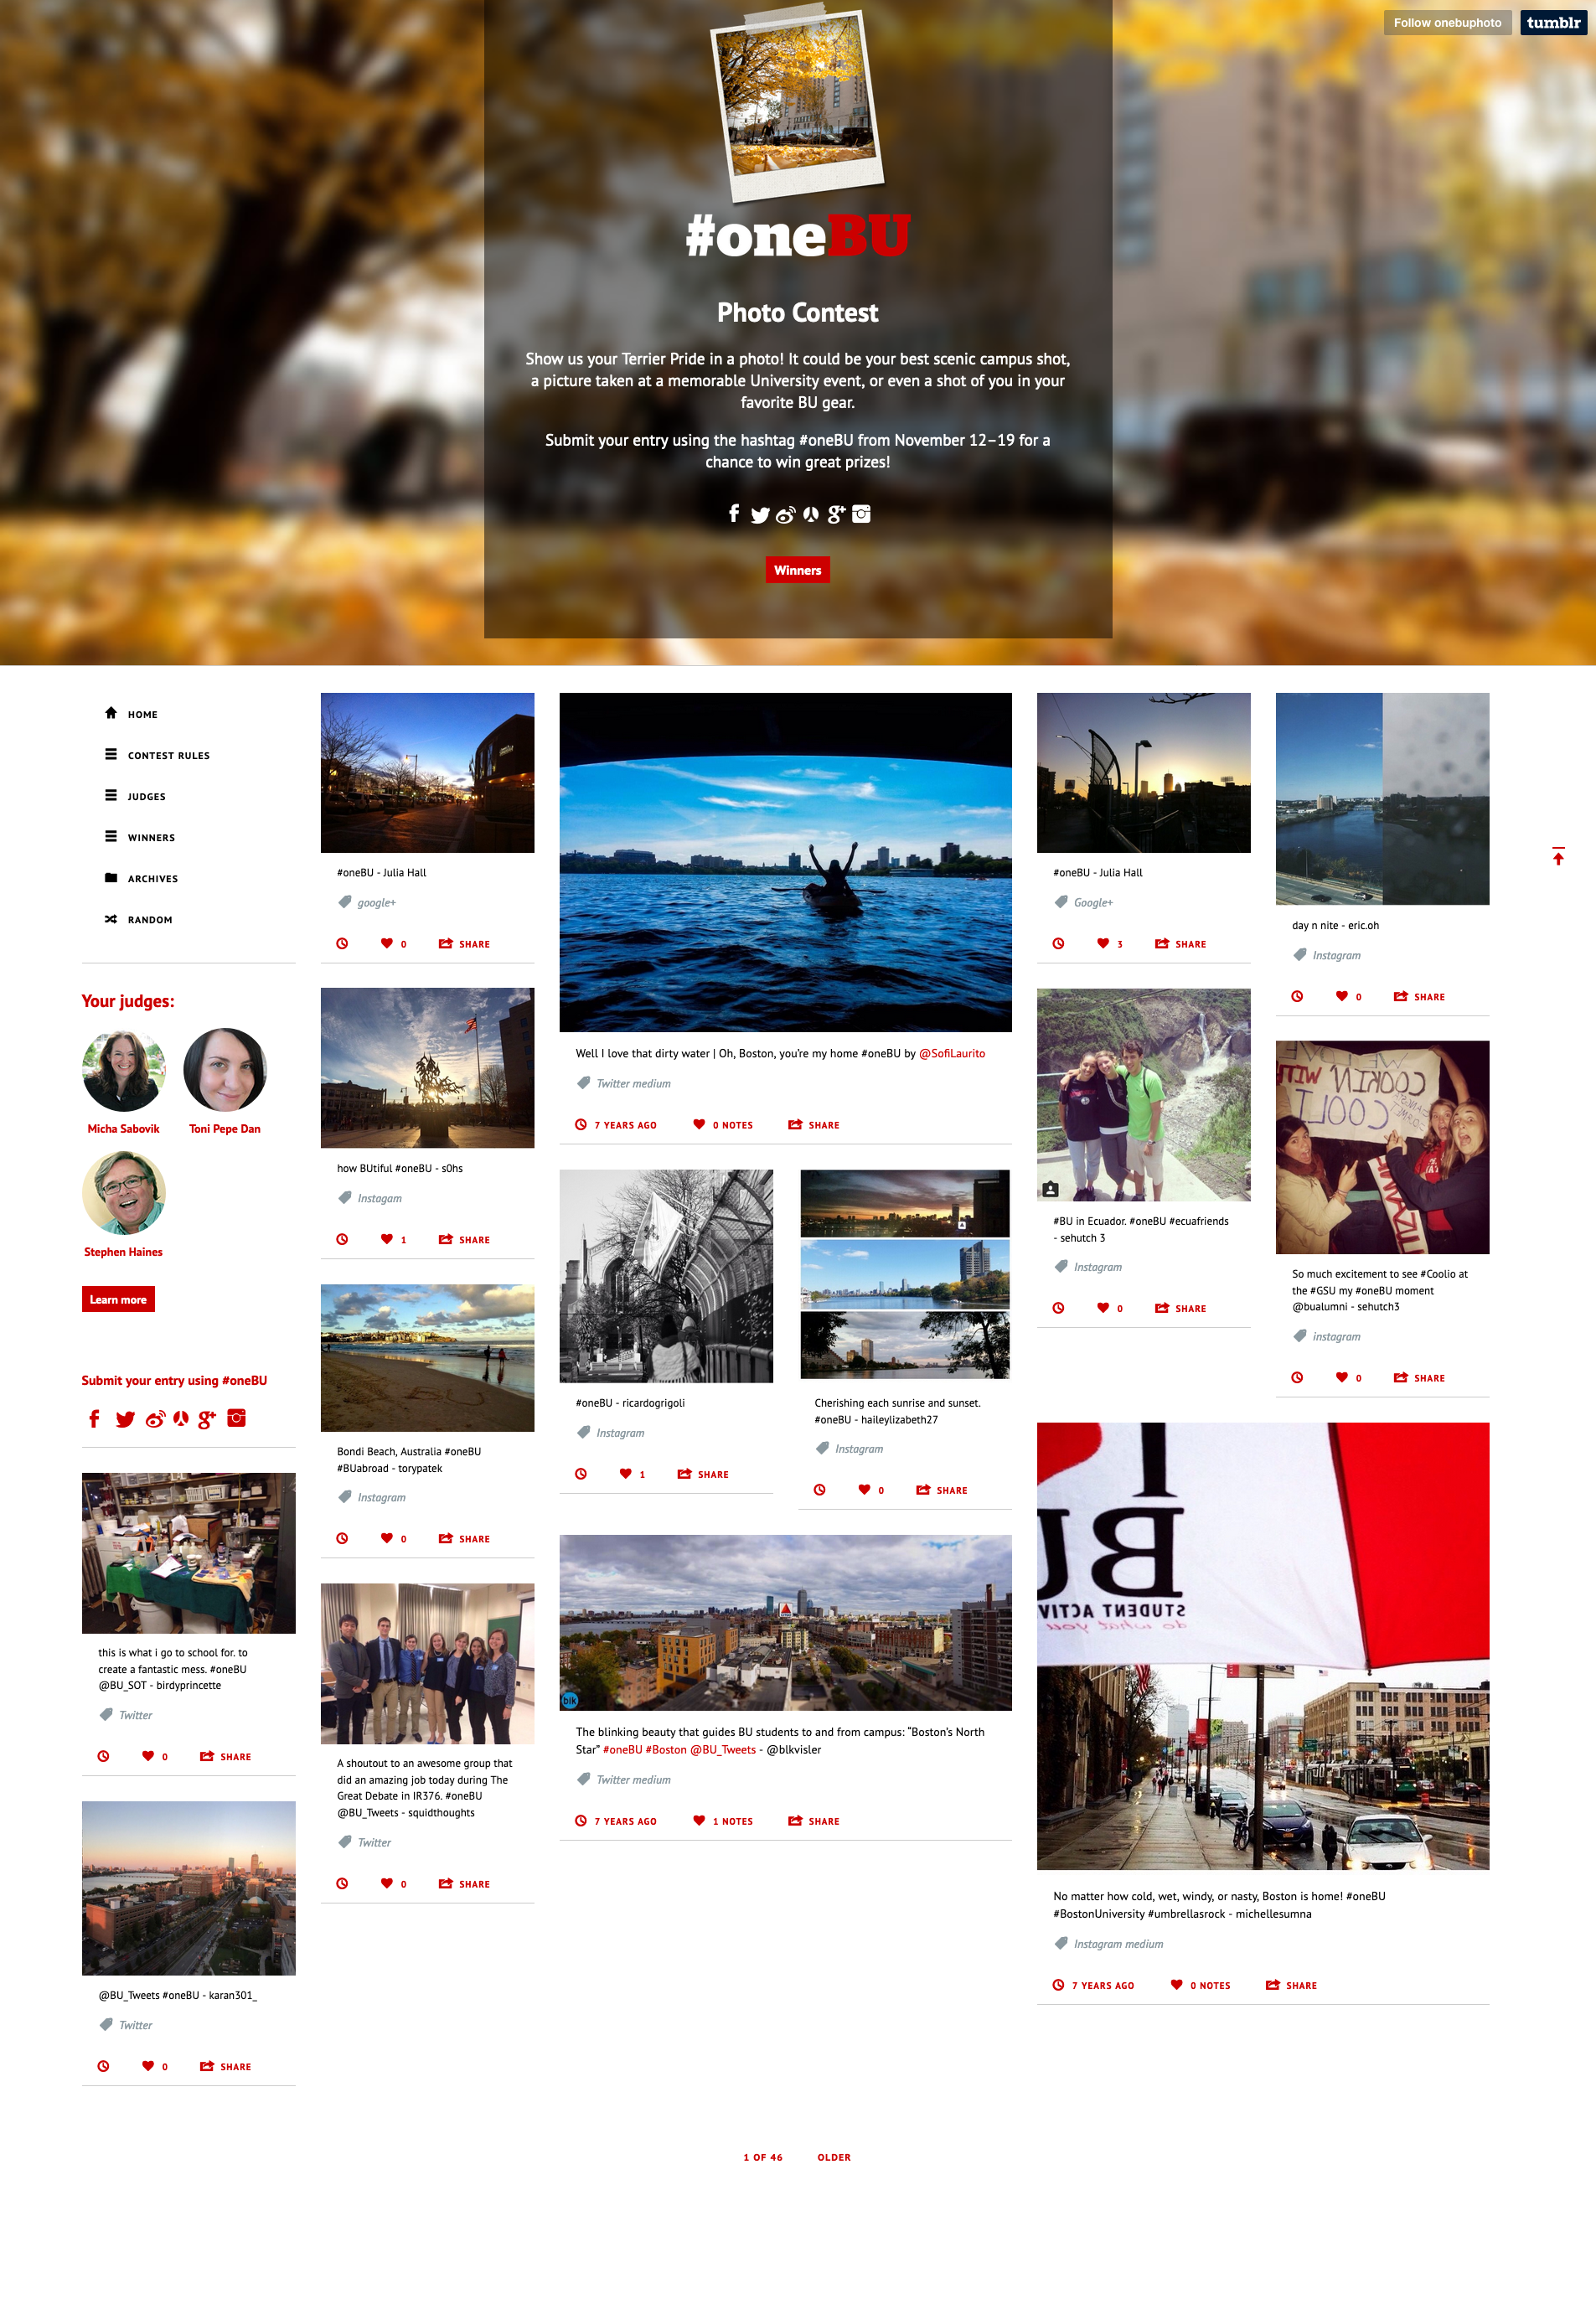 A Tumblr theme for a photo contest for Boston University. Features a clean, minimal, Pinterest-like design where each photo is laid out to create the best use of space. The top has a slightly blurred image of Boston University in the fall, with the leaves on the trees turning yellow.